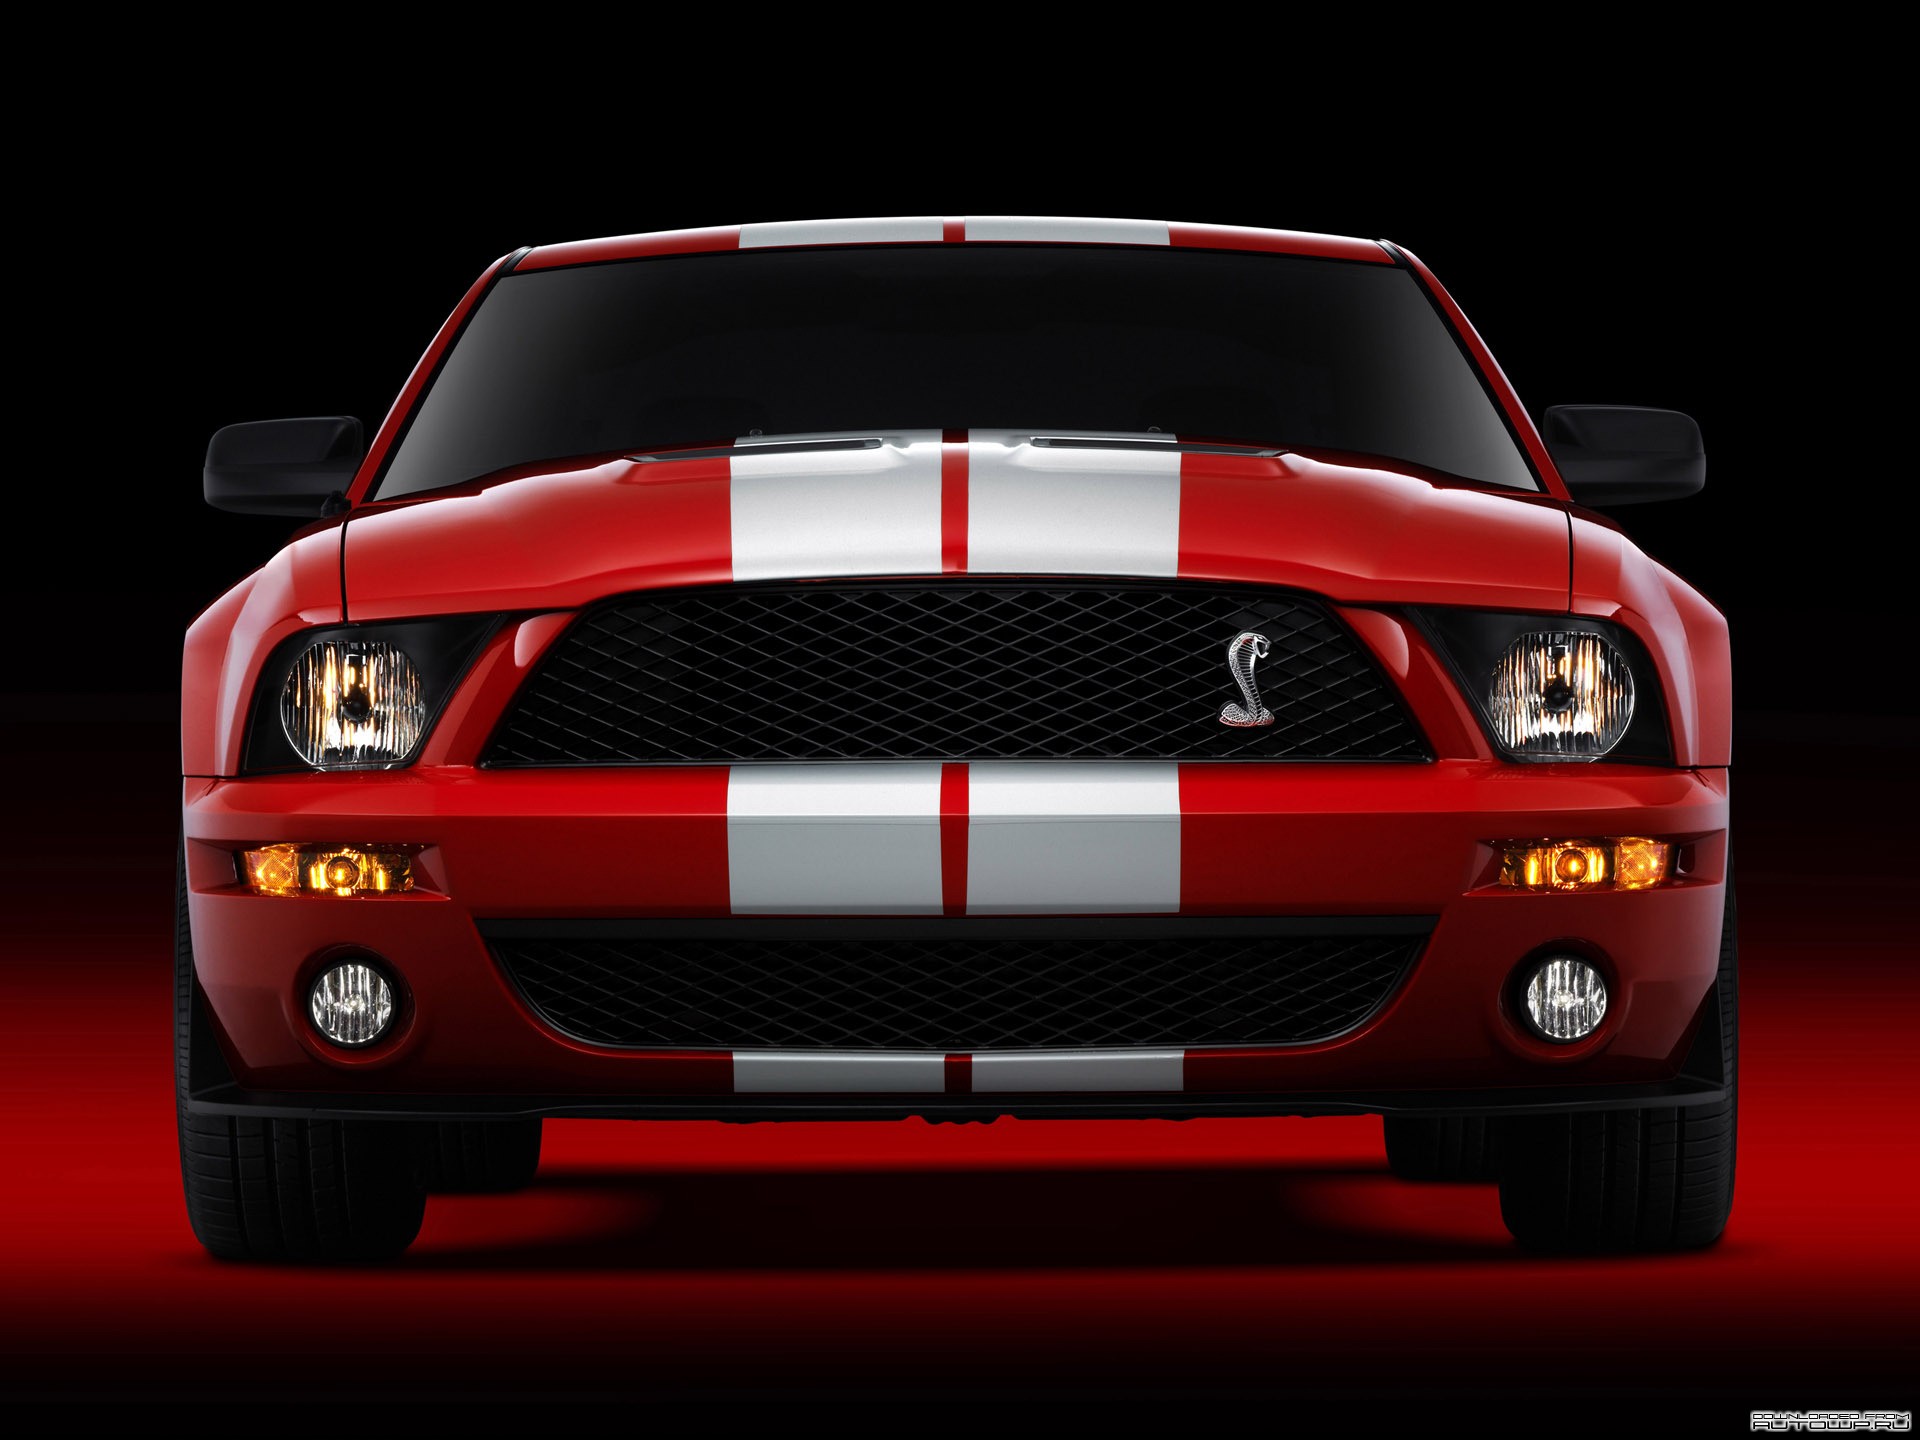 General 1920x1440 car red cars vehicle Shelby Ford Ford Mustang Ford Mustang S-197 Ford Mustang Shelby racing stripes muscle cars American cars